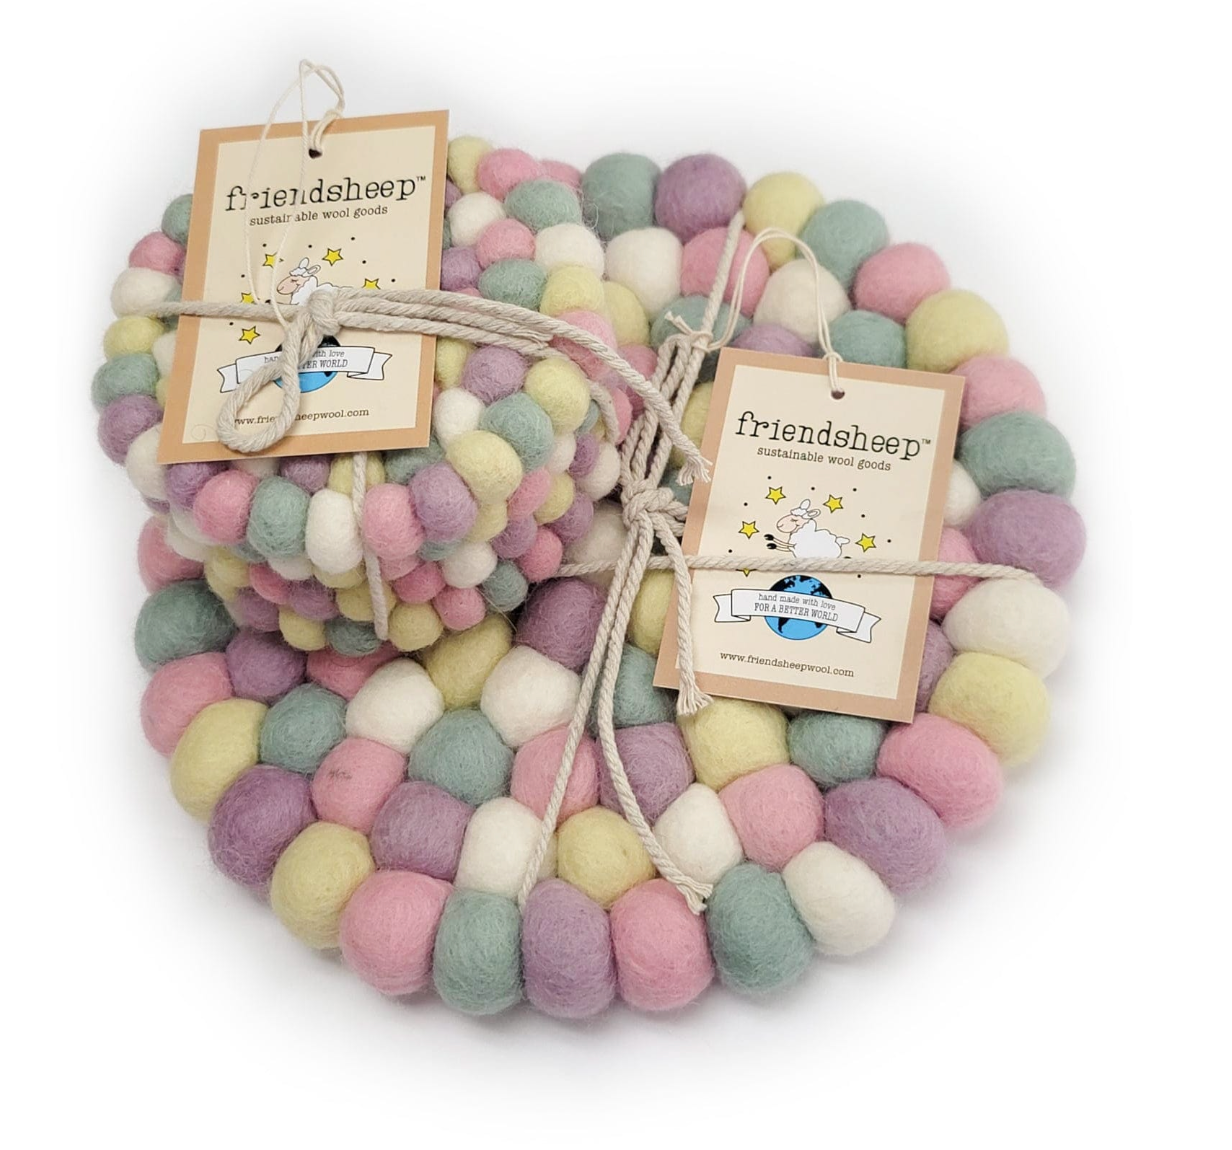 Friendsheep - Cotton Candy Eco Coasters and Trivets